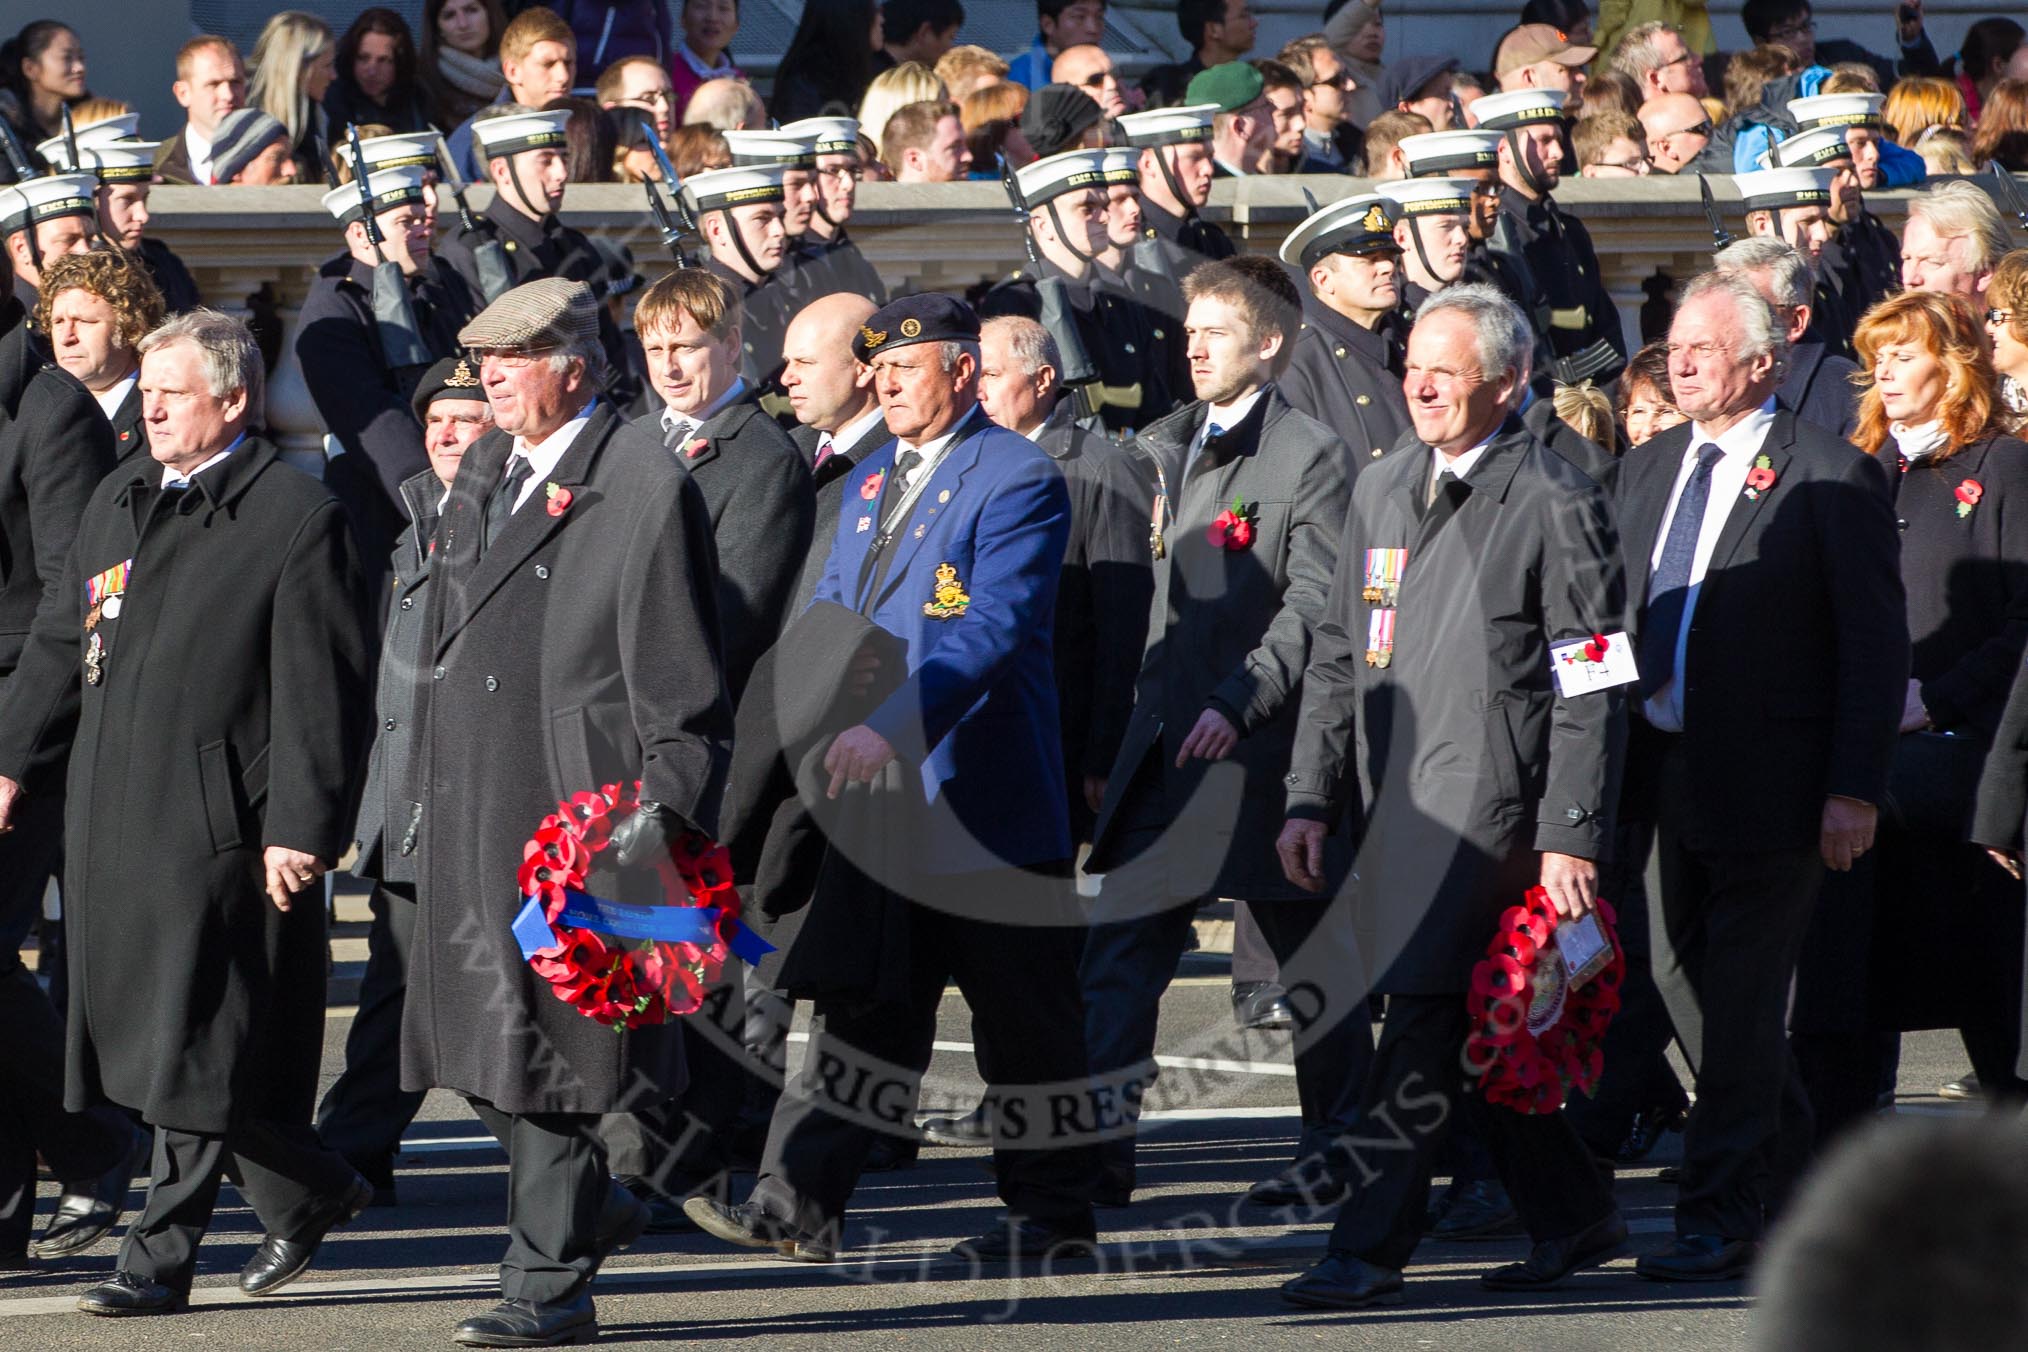 Remembrance Sunday 2012 Cenotaph March Past: Group F4 - Showmens' Guild of Great Britain..
Whitehall, Cenotaph,
London SW1,

United Kingdom,
on 11 November 2012 at 11:45, image #411